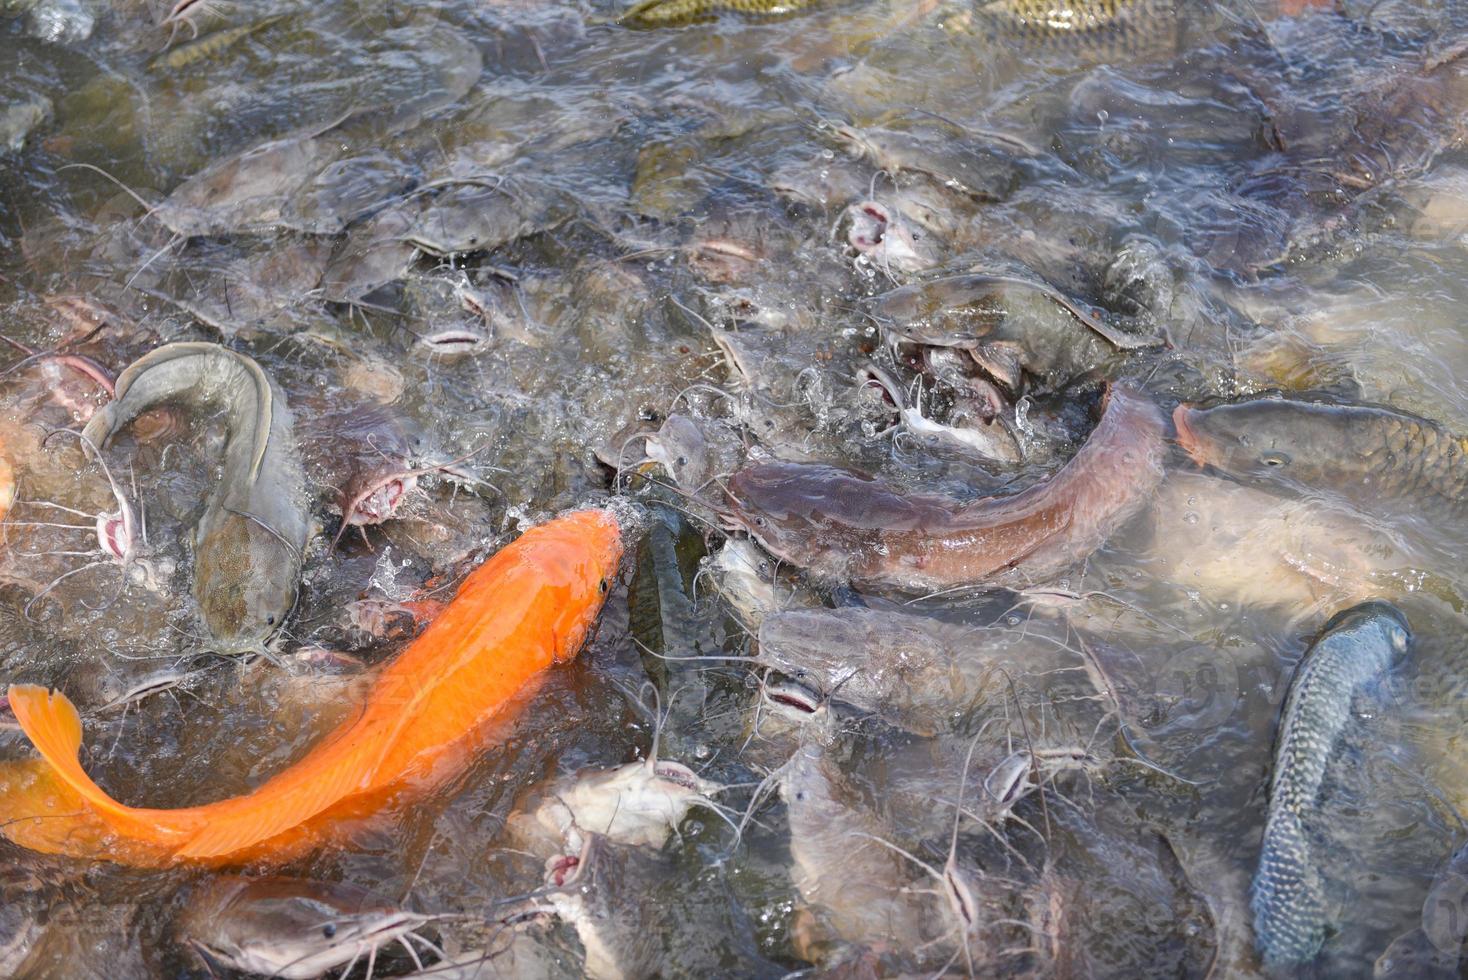 Tilapia farm freshwater - Golden carp fish tilapia or orange carp and catfish eating from feeding food on water surface ponds in the fish farm photo